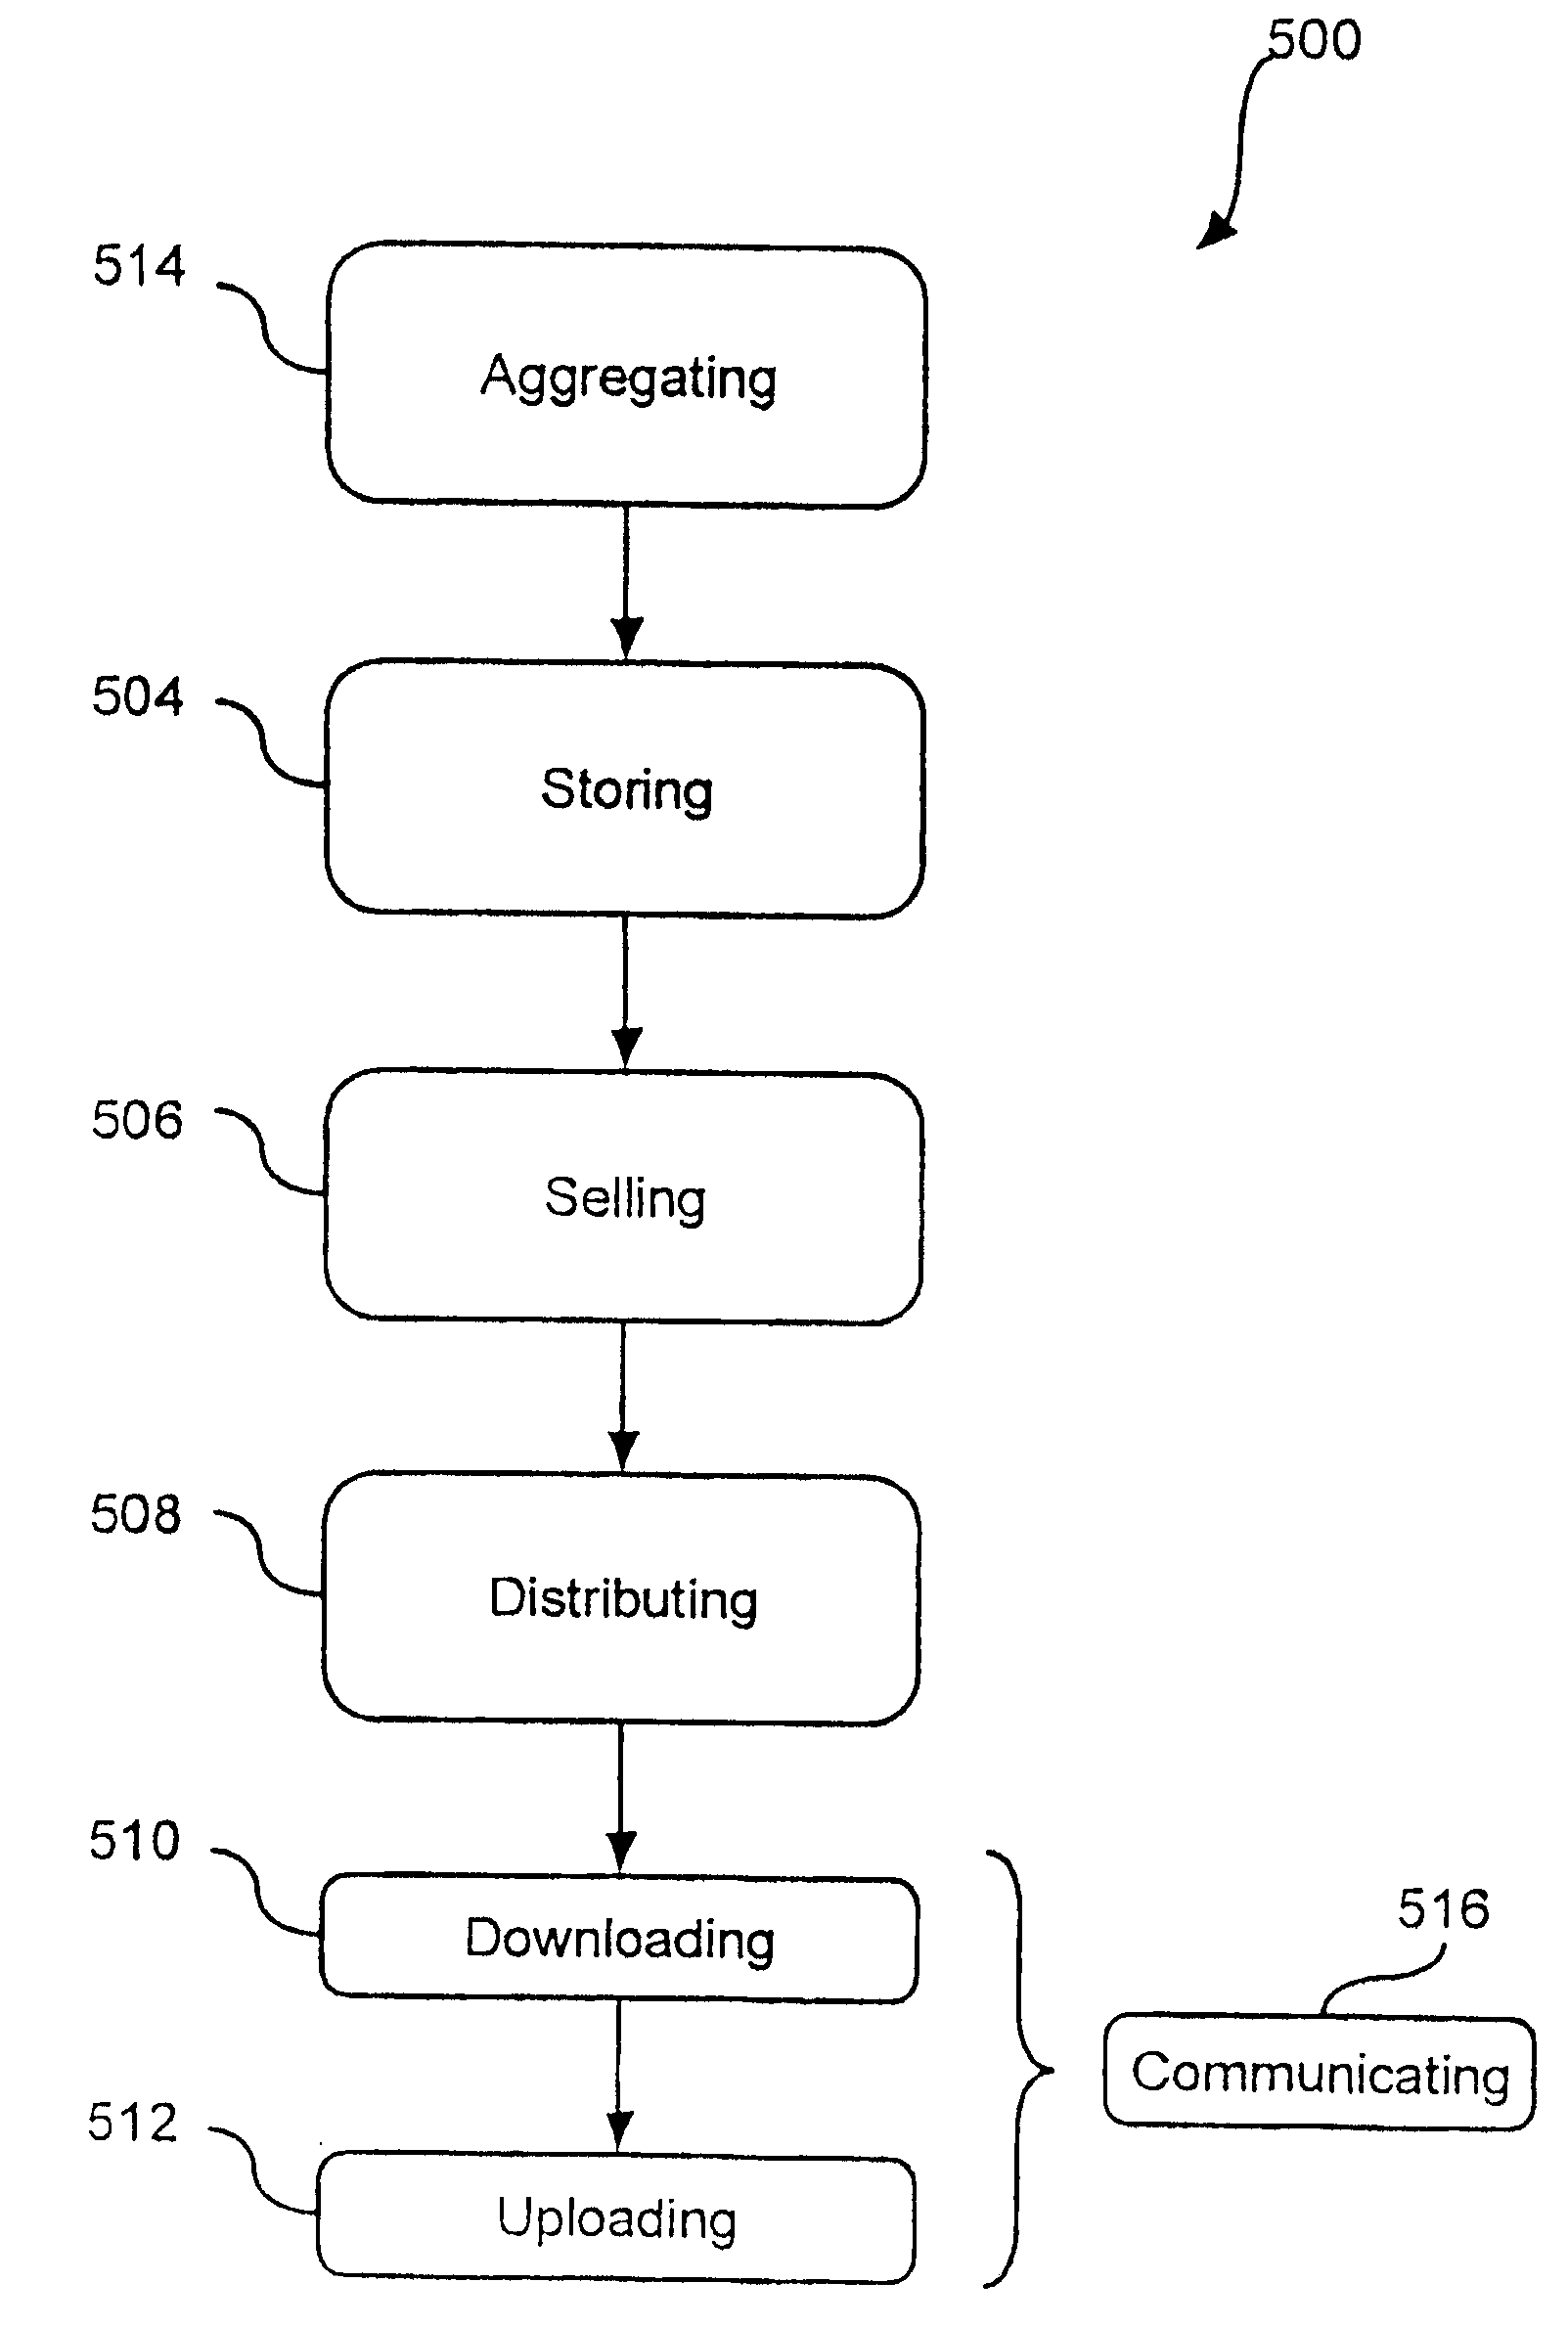 Method and System for Providing Current Industry Specific Data to Physicians